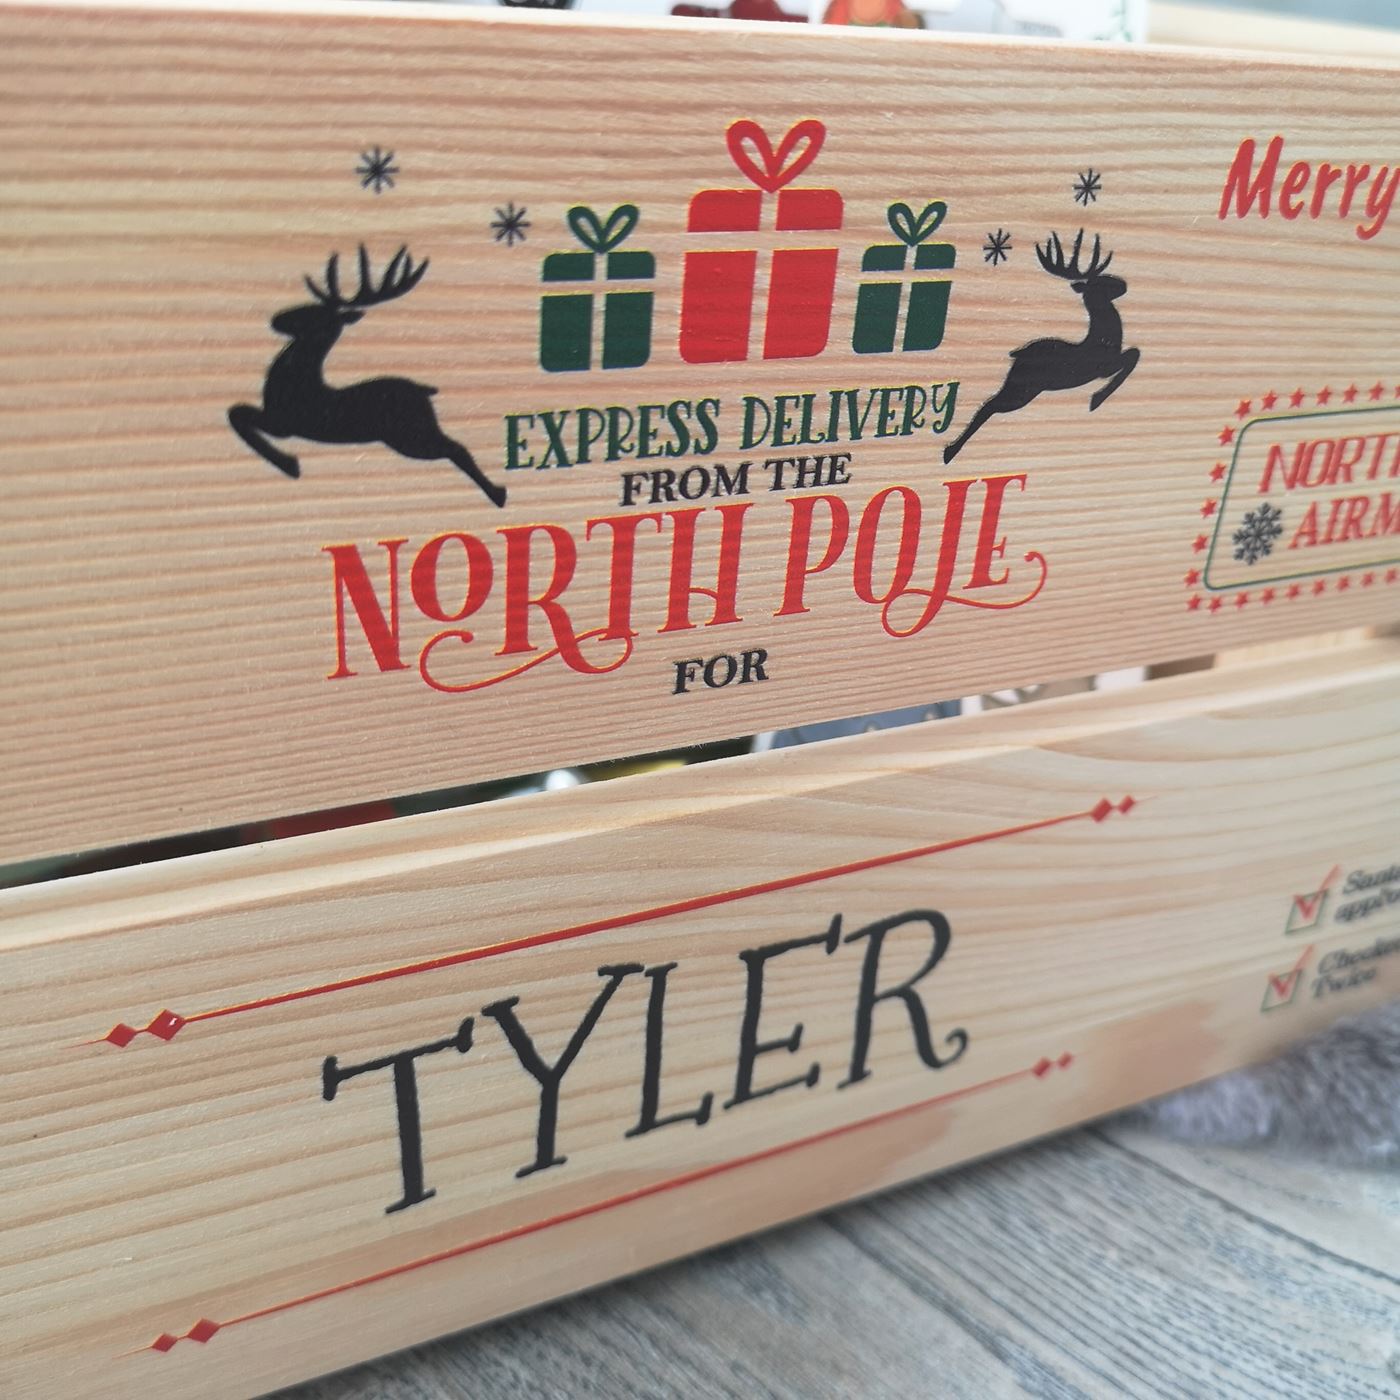 Personalised Christmas Eve Box Wooden Pine Crate - Special North Pole Delivery